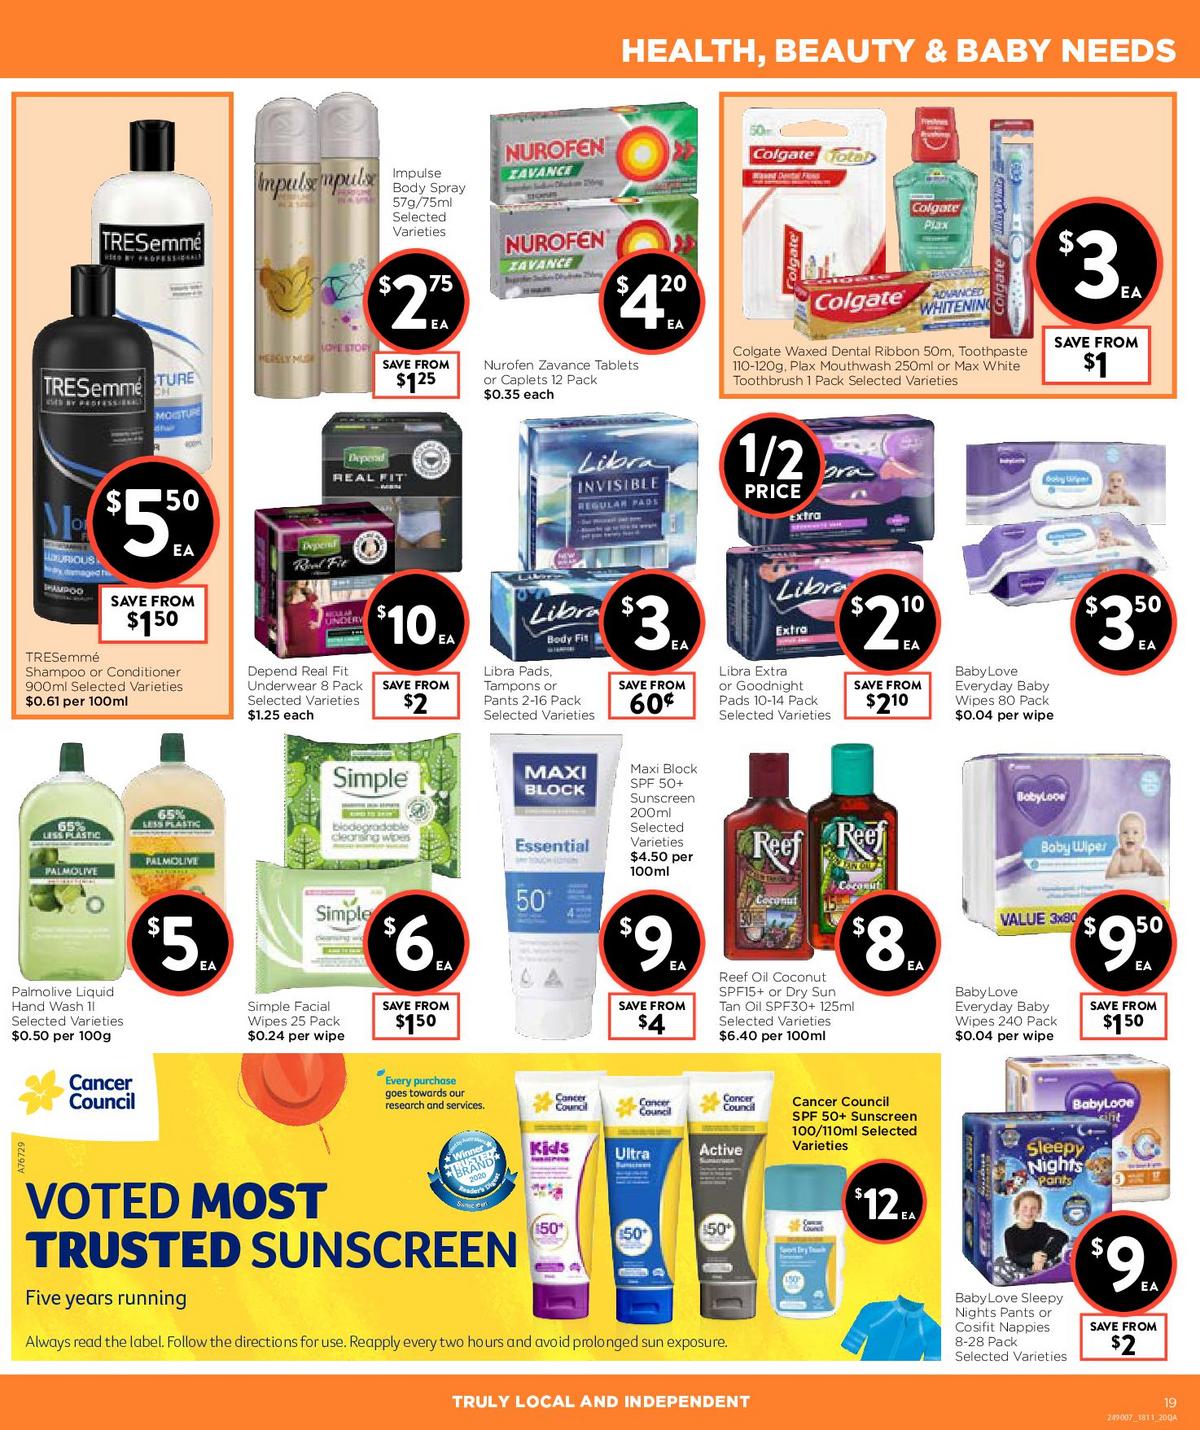 FoodWorks Supermarket Catalogues from 18 November